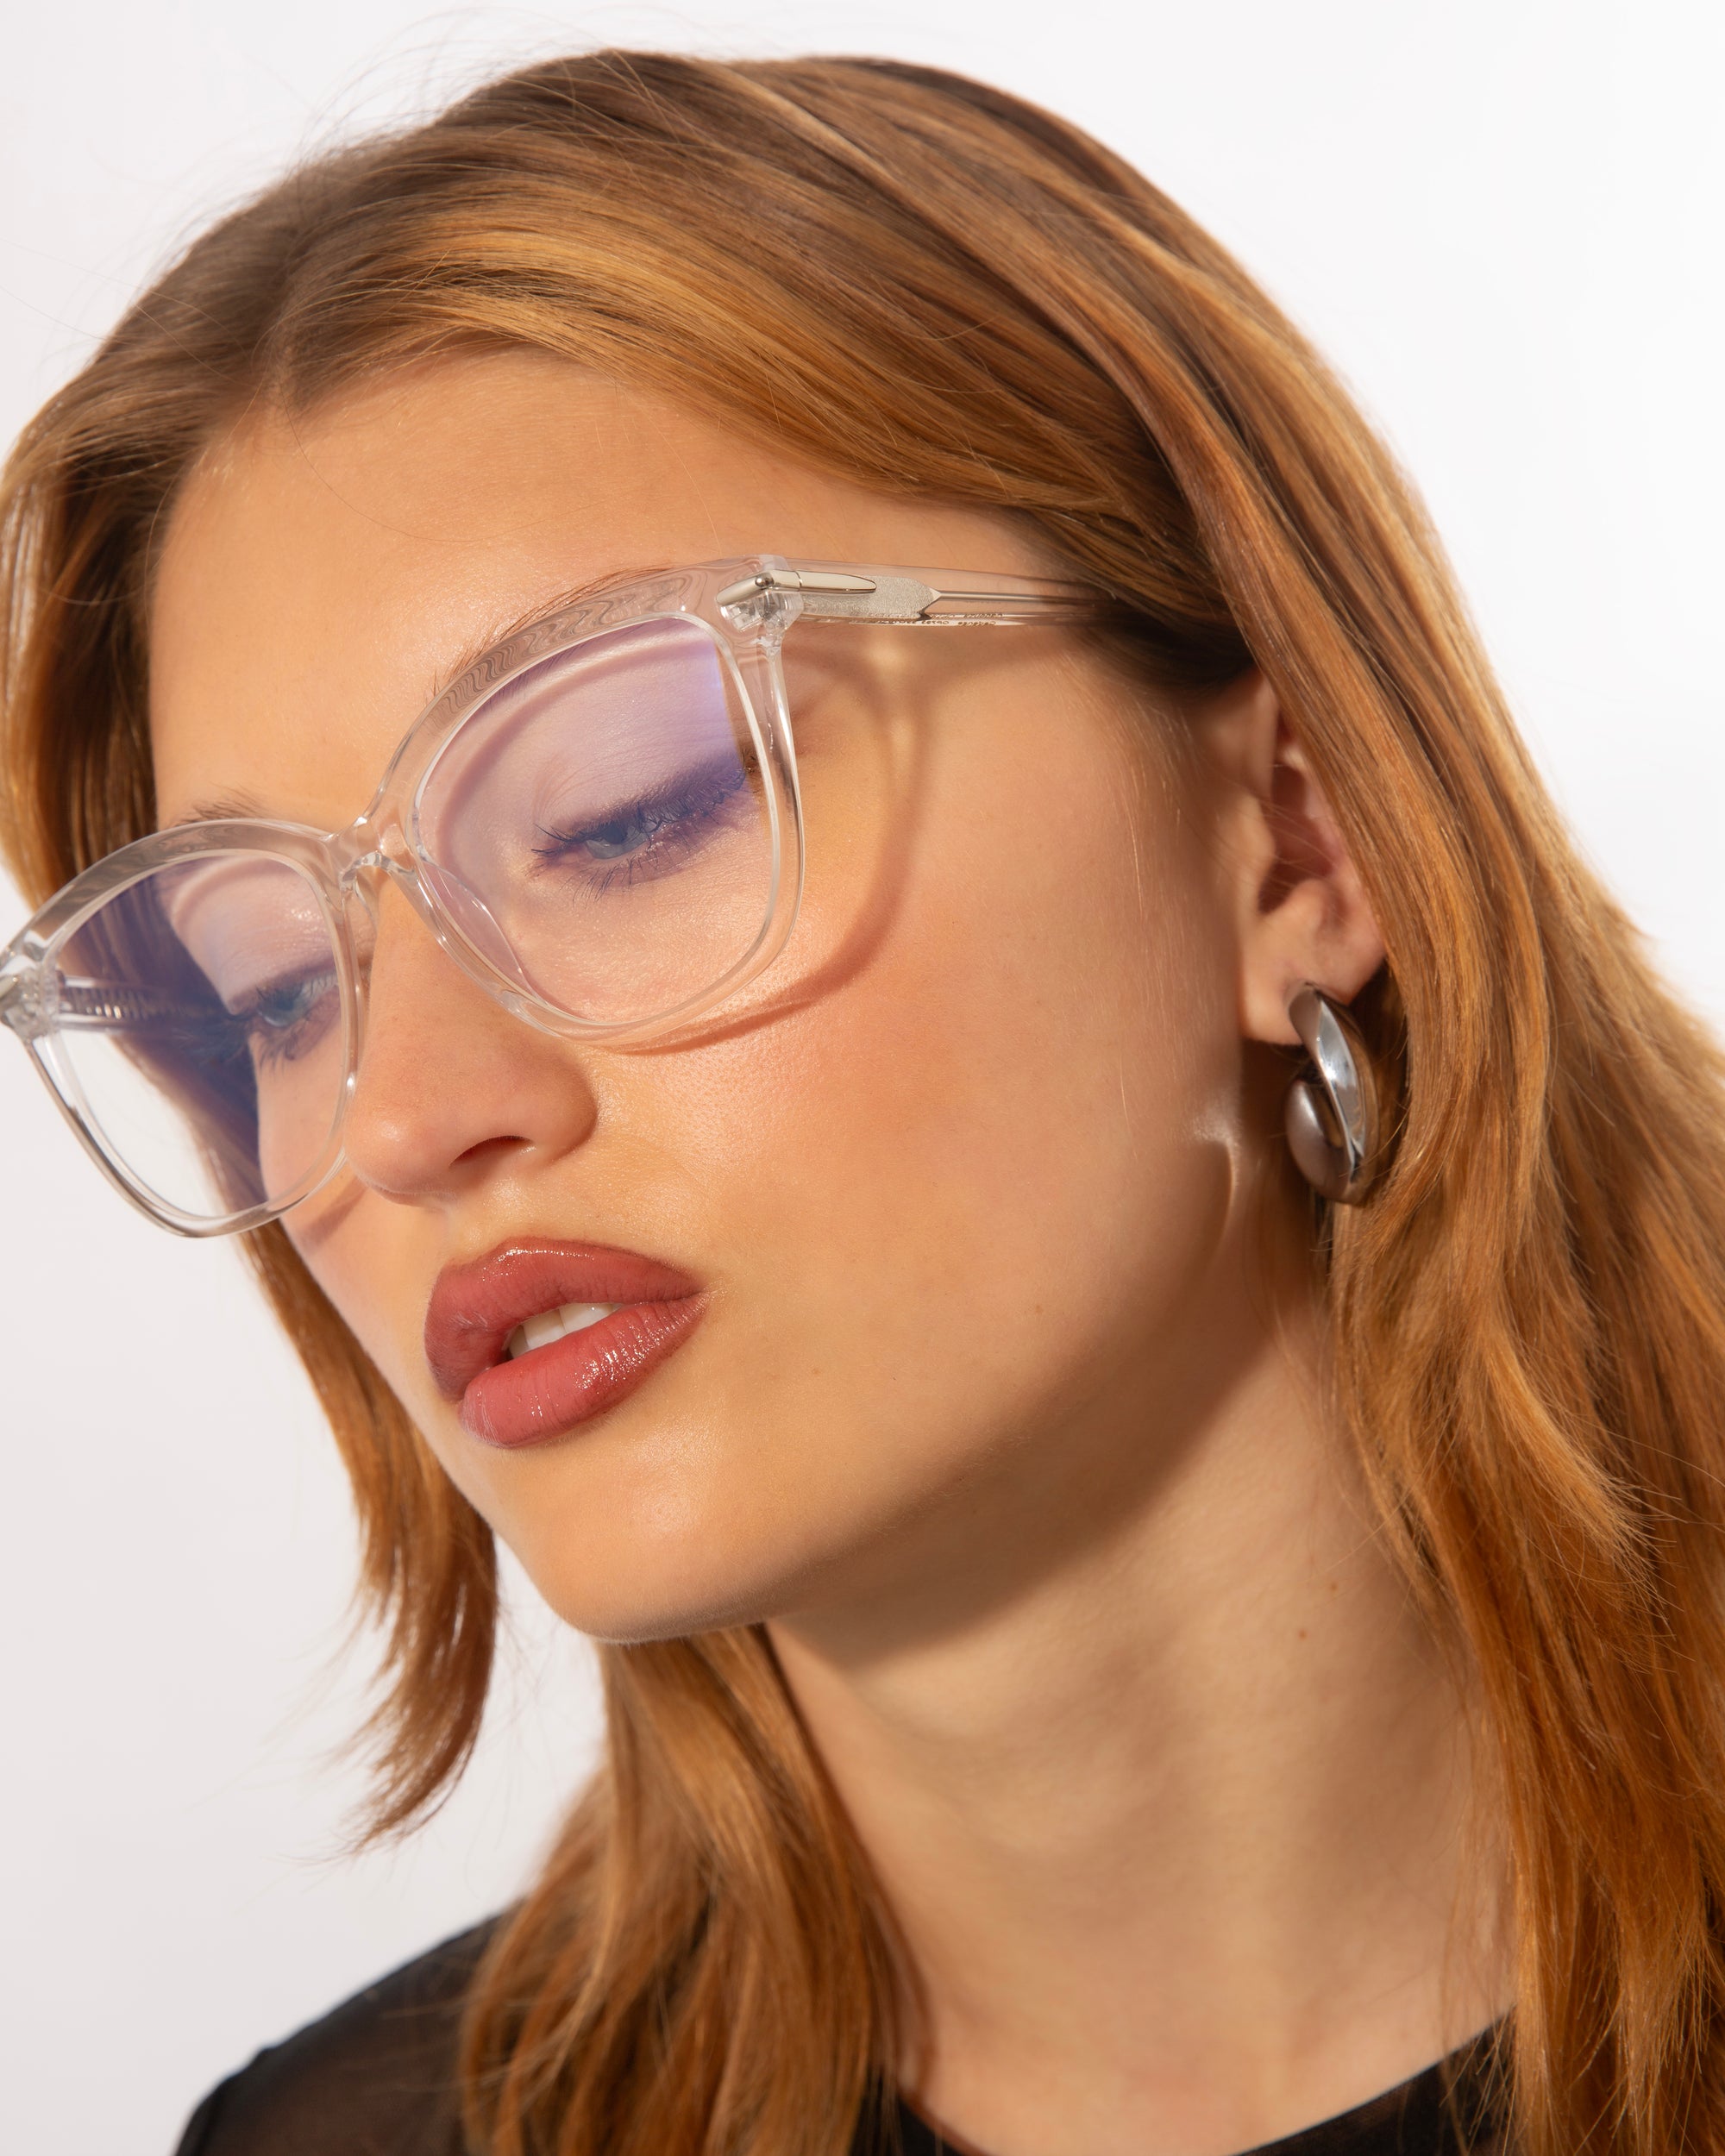 A person with light brown hair is wearing large, transparent Cadenza optical glasses by For Art&#39;s Sake® and hoop earrings. They have a neutral expression and are looking downward slightly. The background is plain white, highlighting their features.